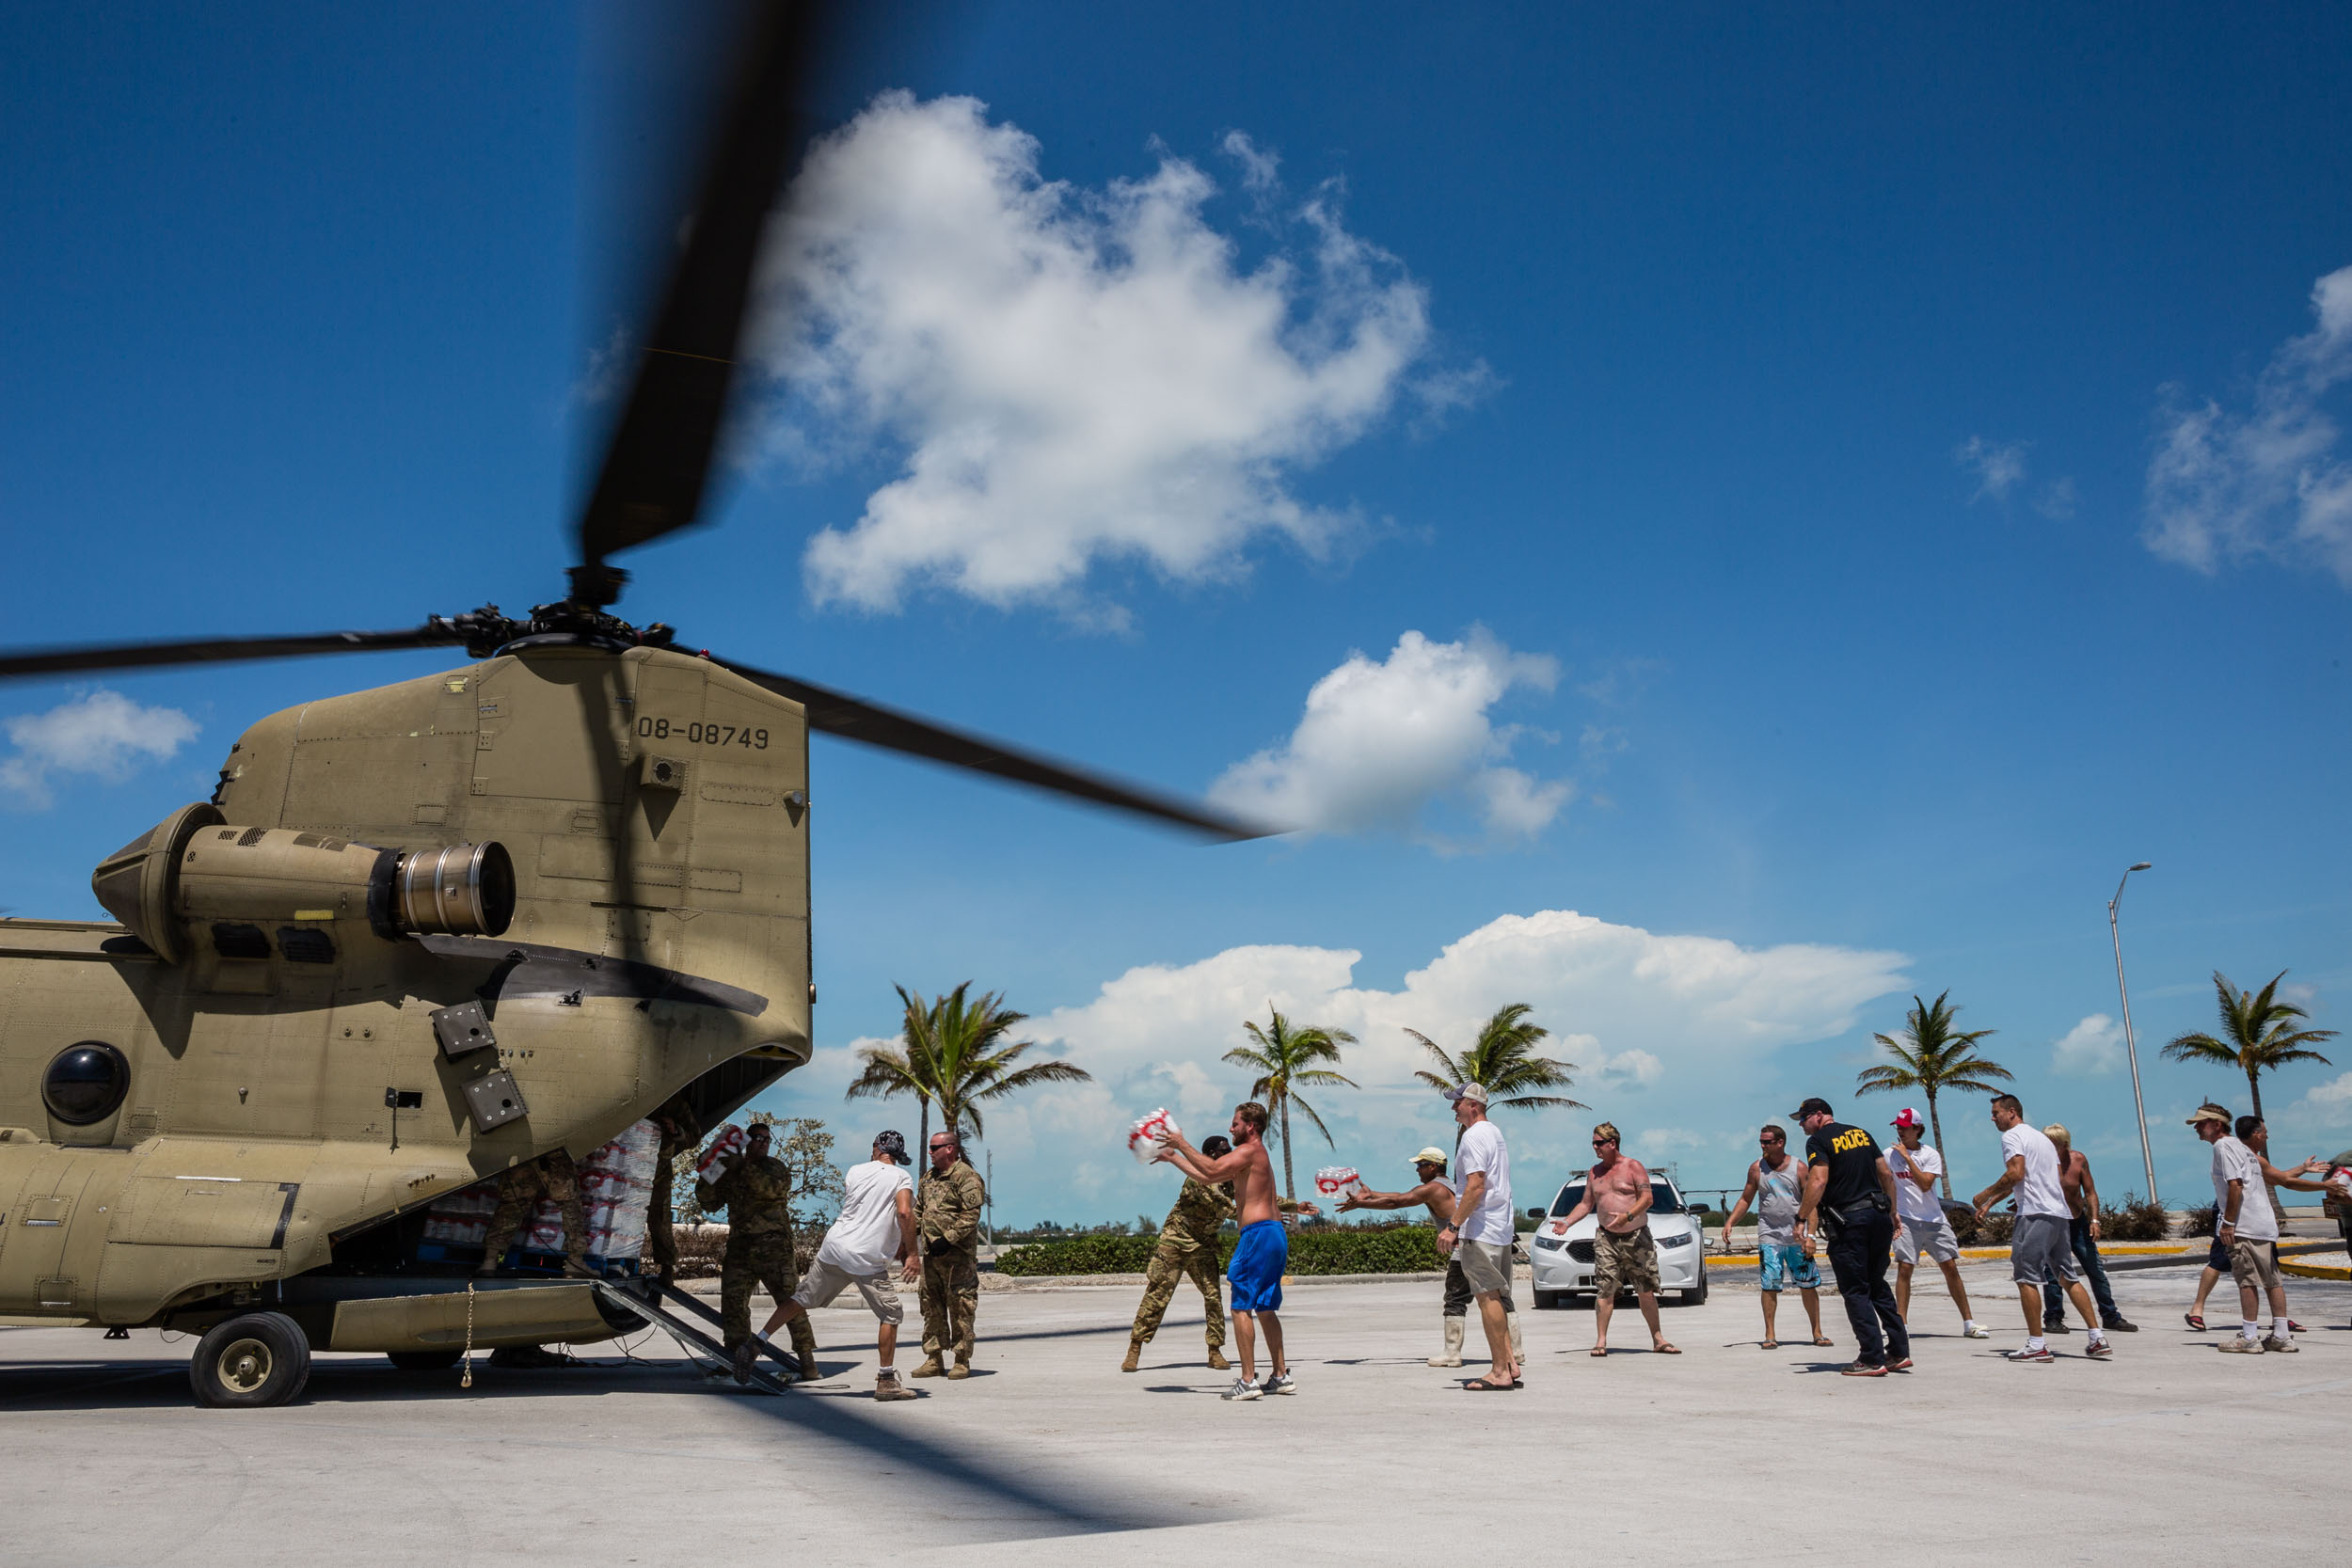 PHOTO: Soldiers with the Florida National Guard deliver food and water by a Chinook cargo helicopter that landed in a shopping center parking lot in Key West, Fla., Sept. 13, 2017.